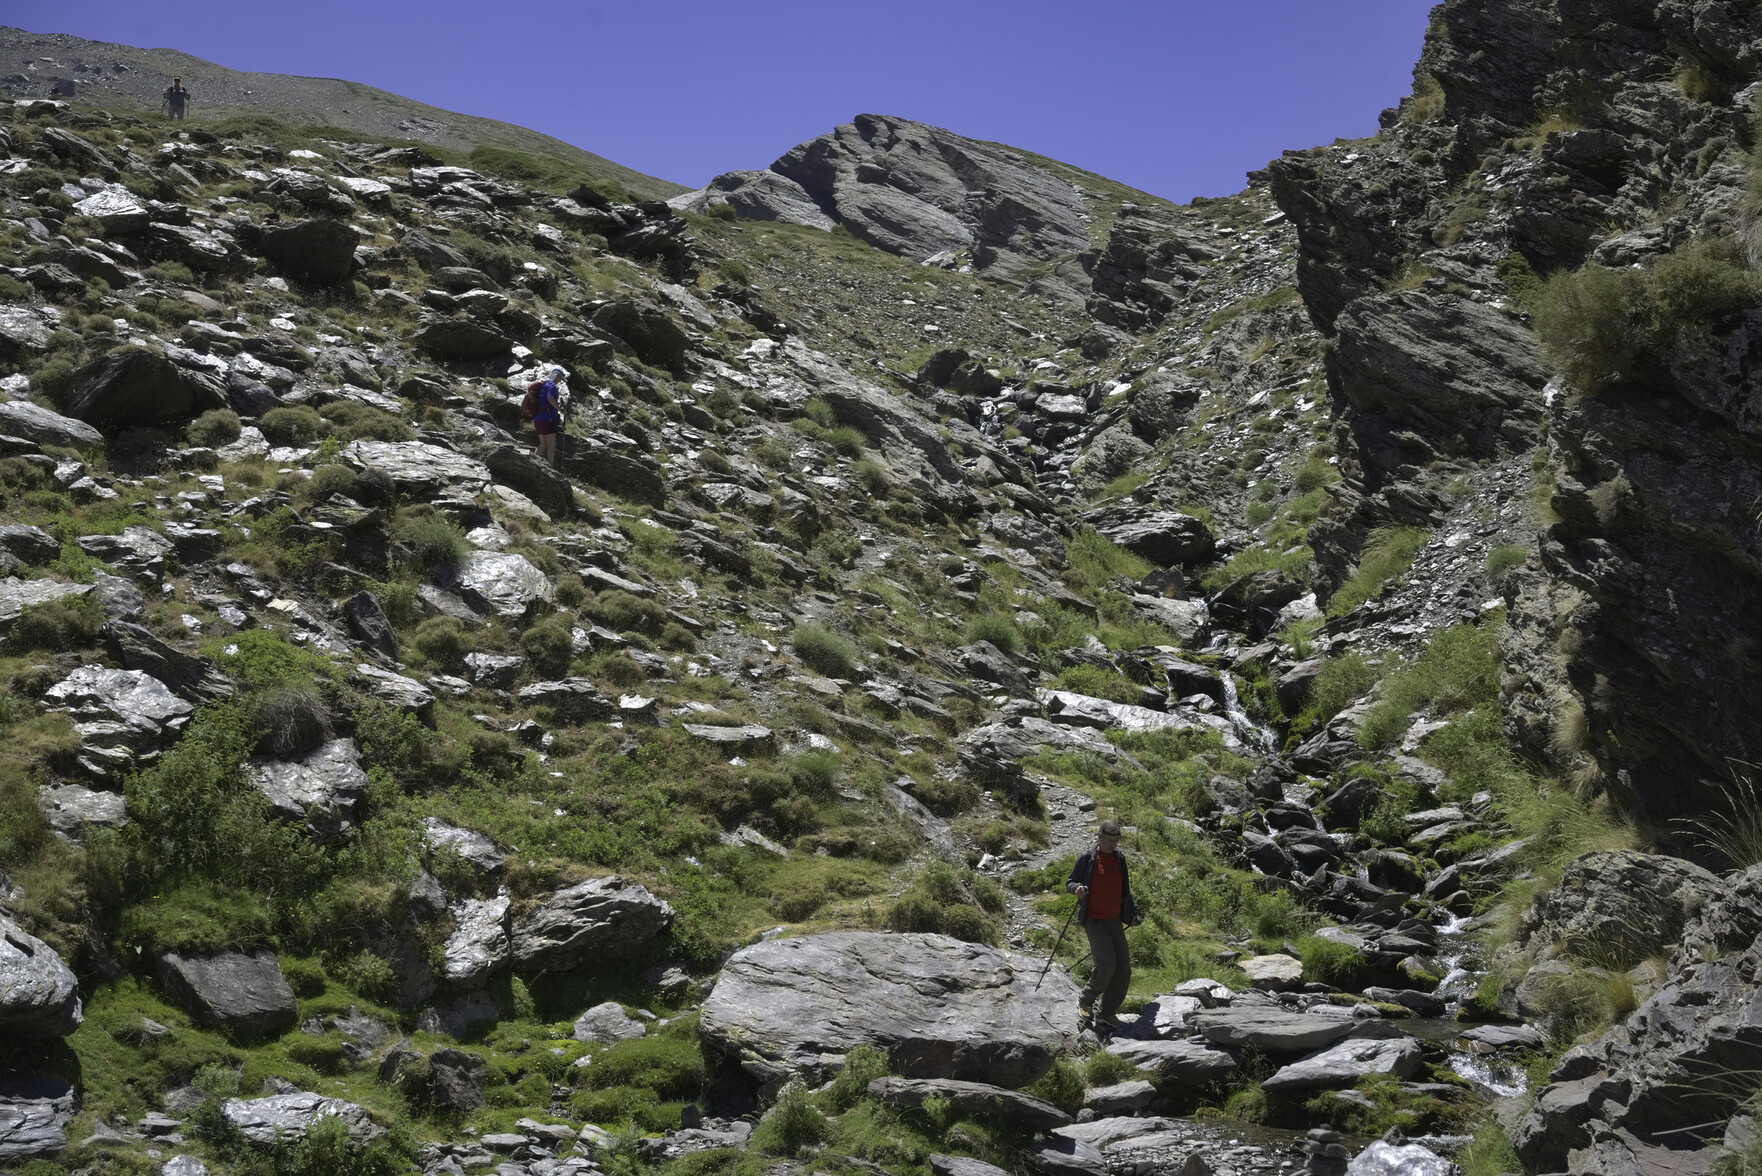 People descending a rocky rough valley with a small stream and a large cliff to the right